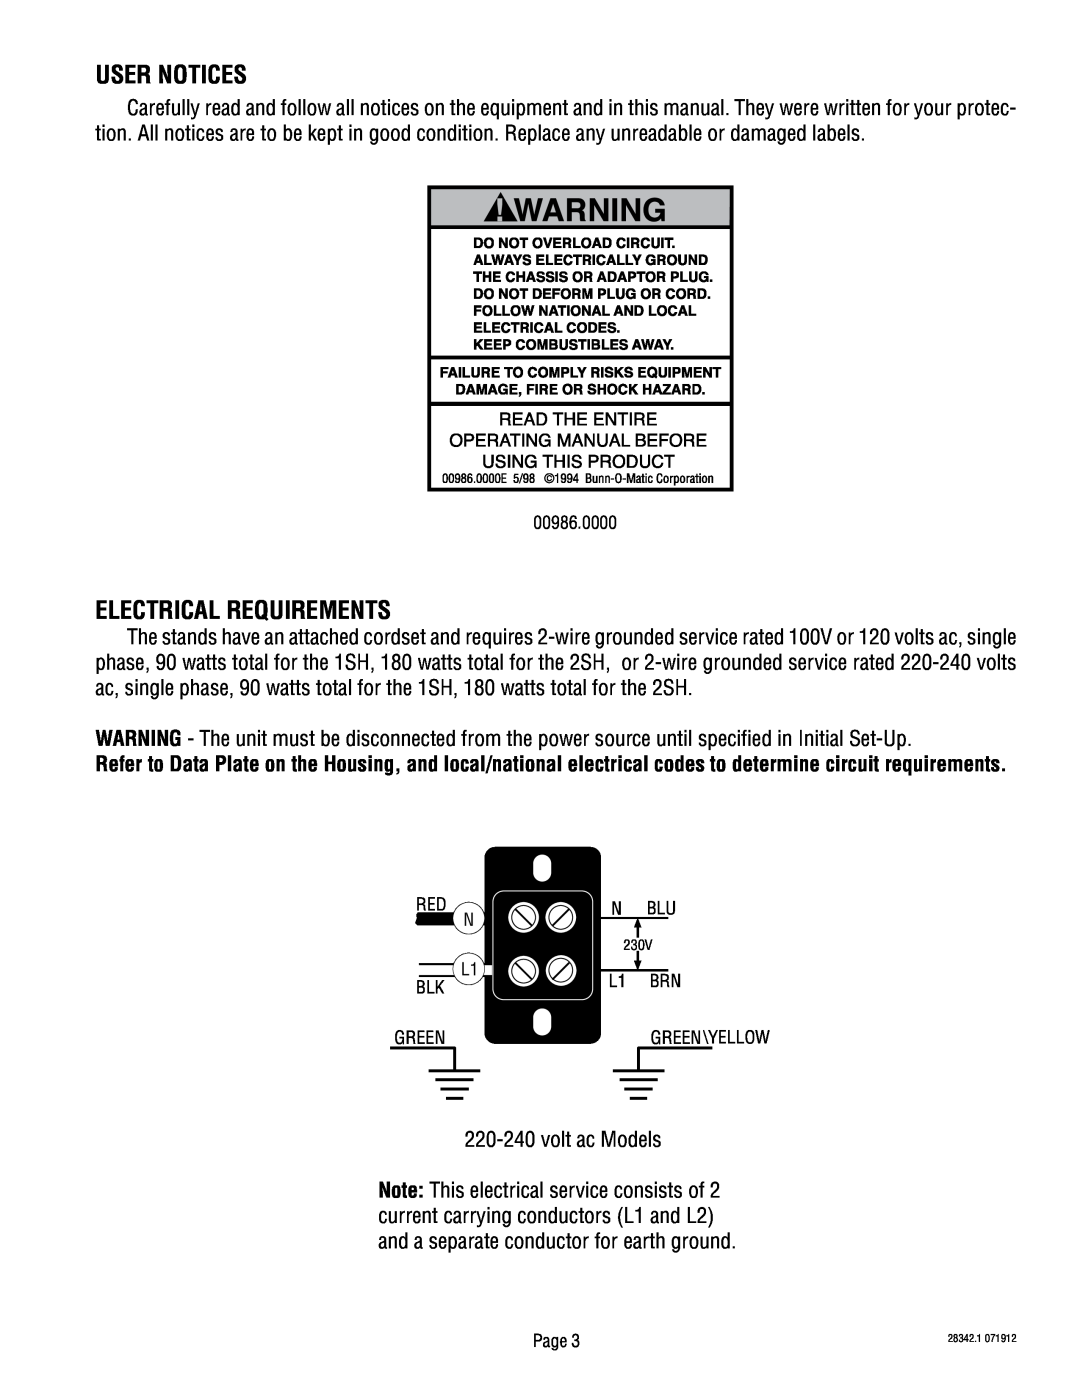 Bunn 2SH service manual User Notices, Electrical Requirements 